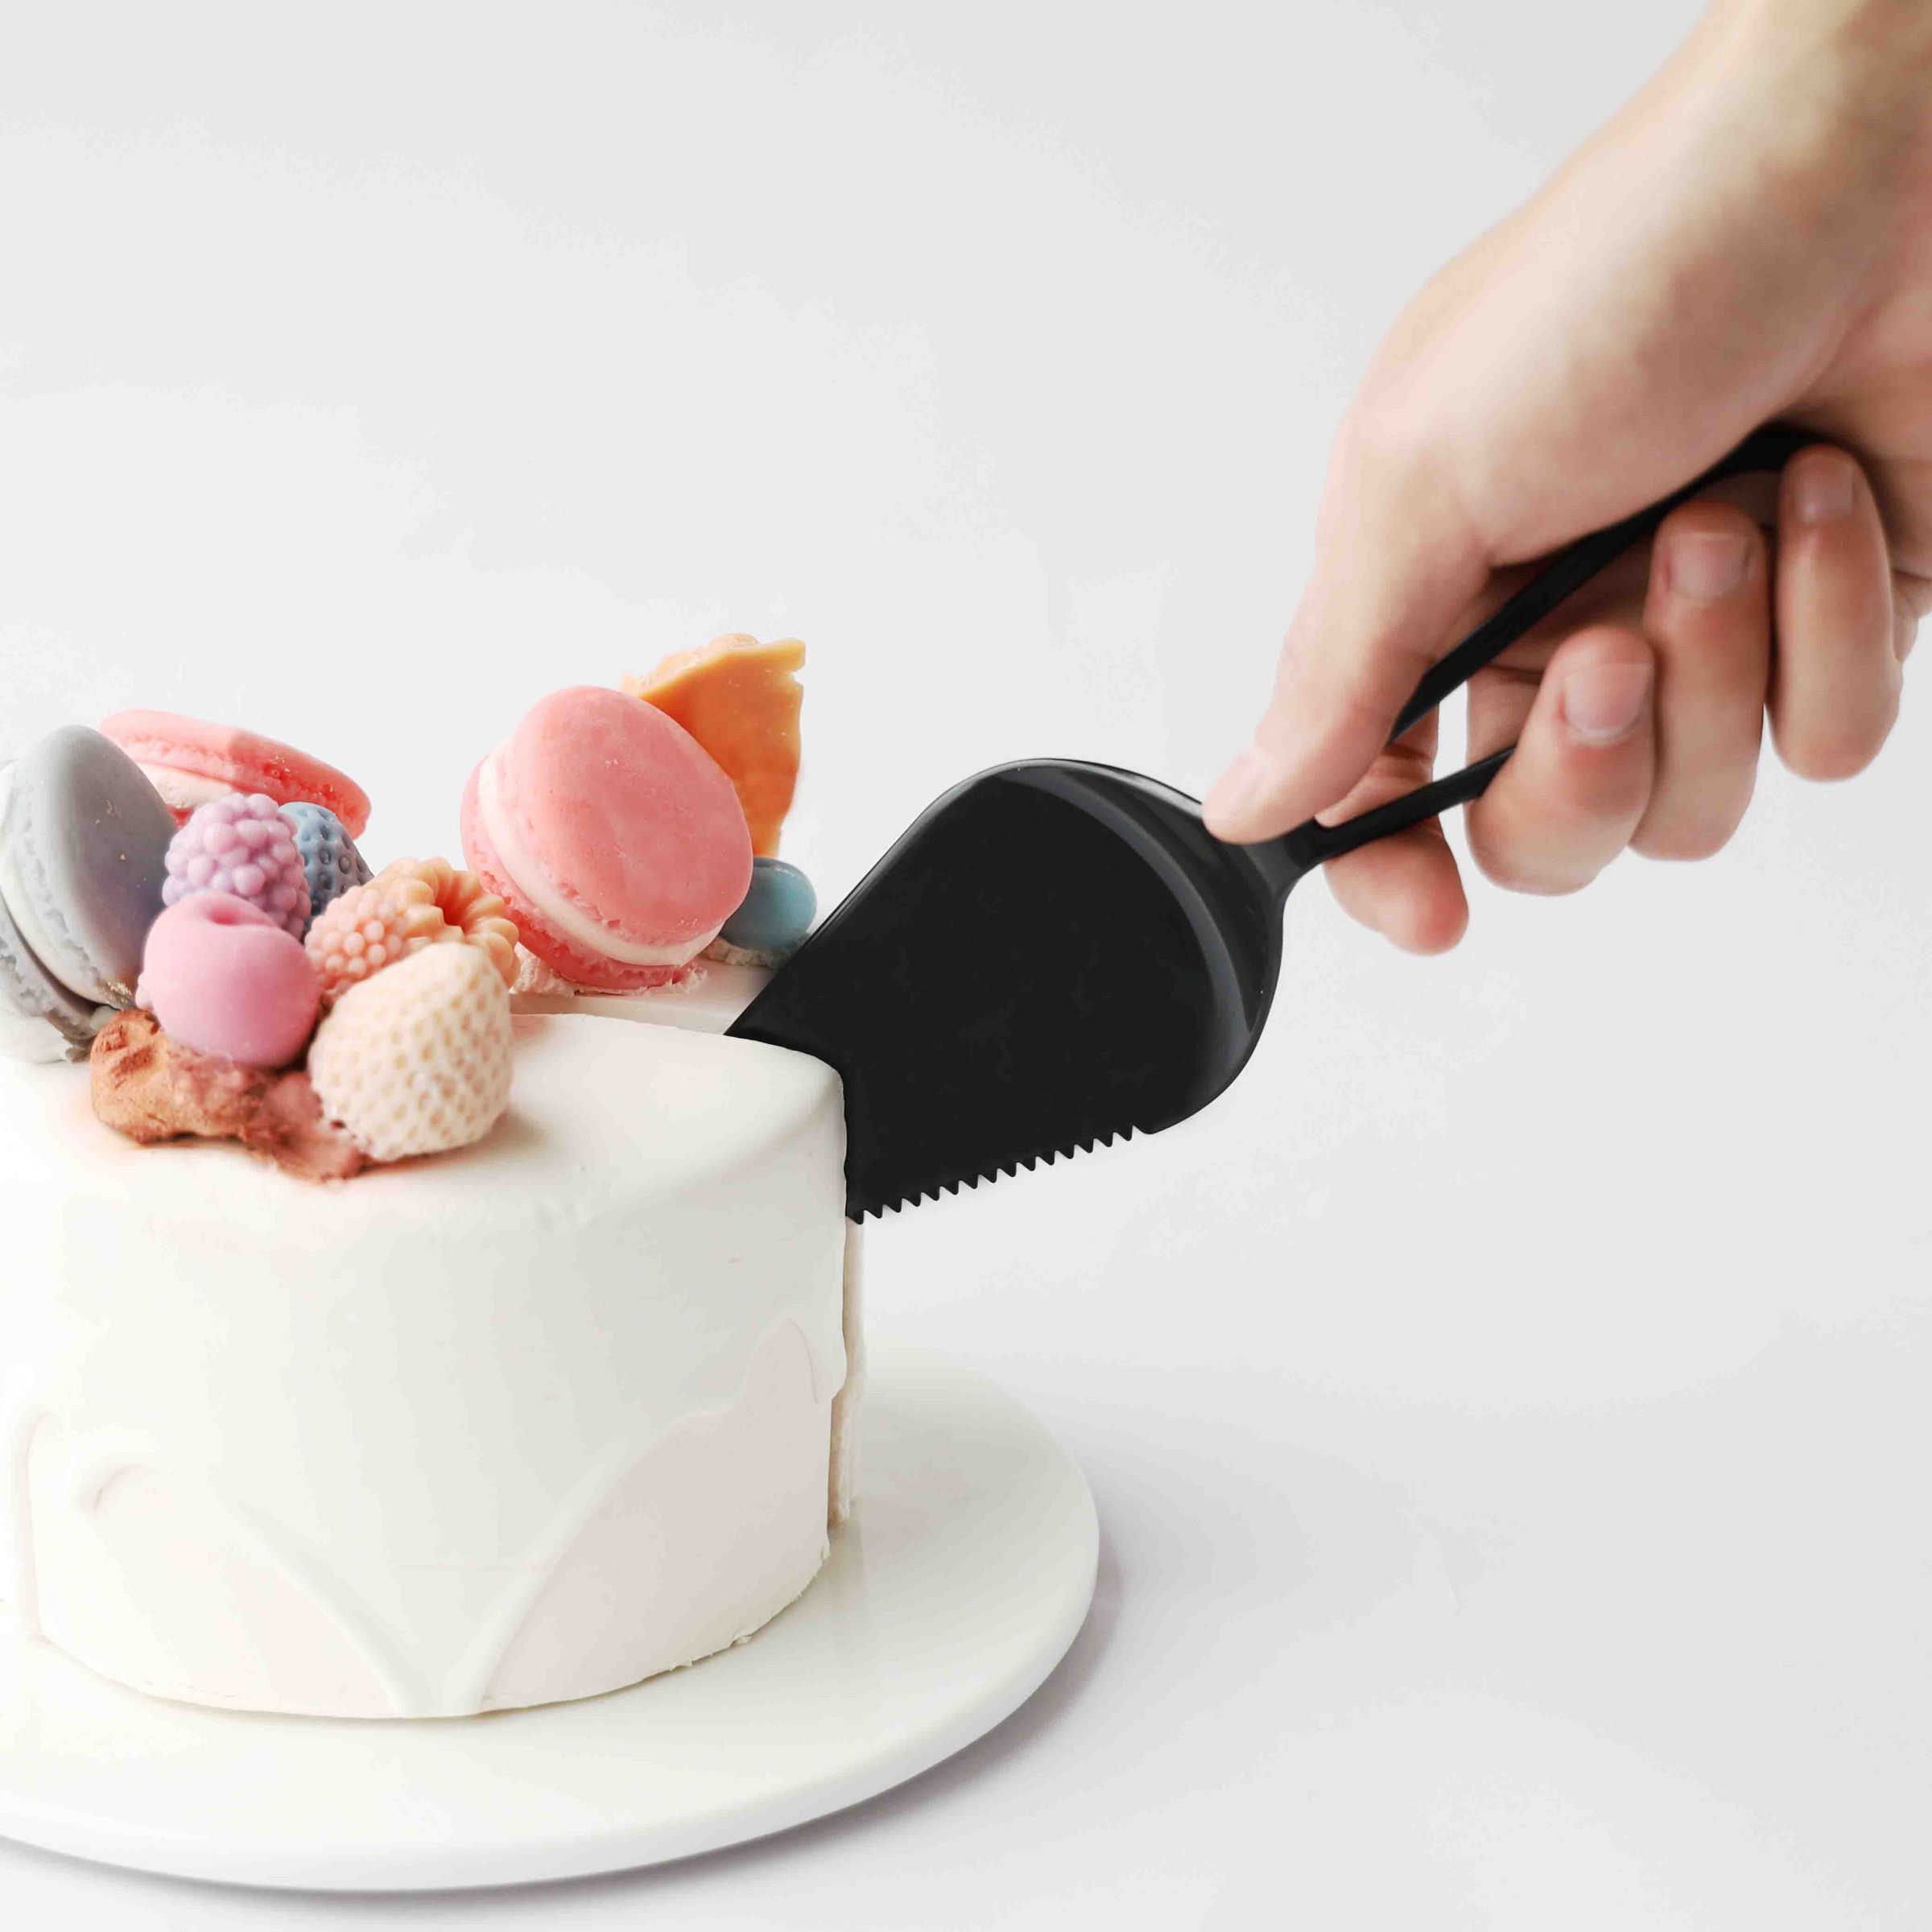 the latest cake server is made from PP material.